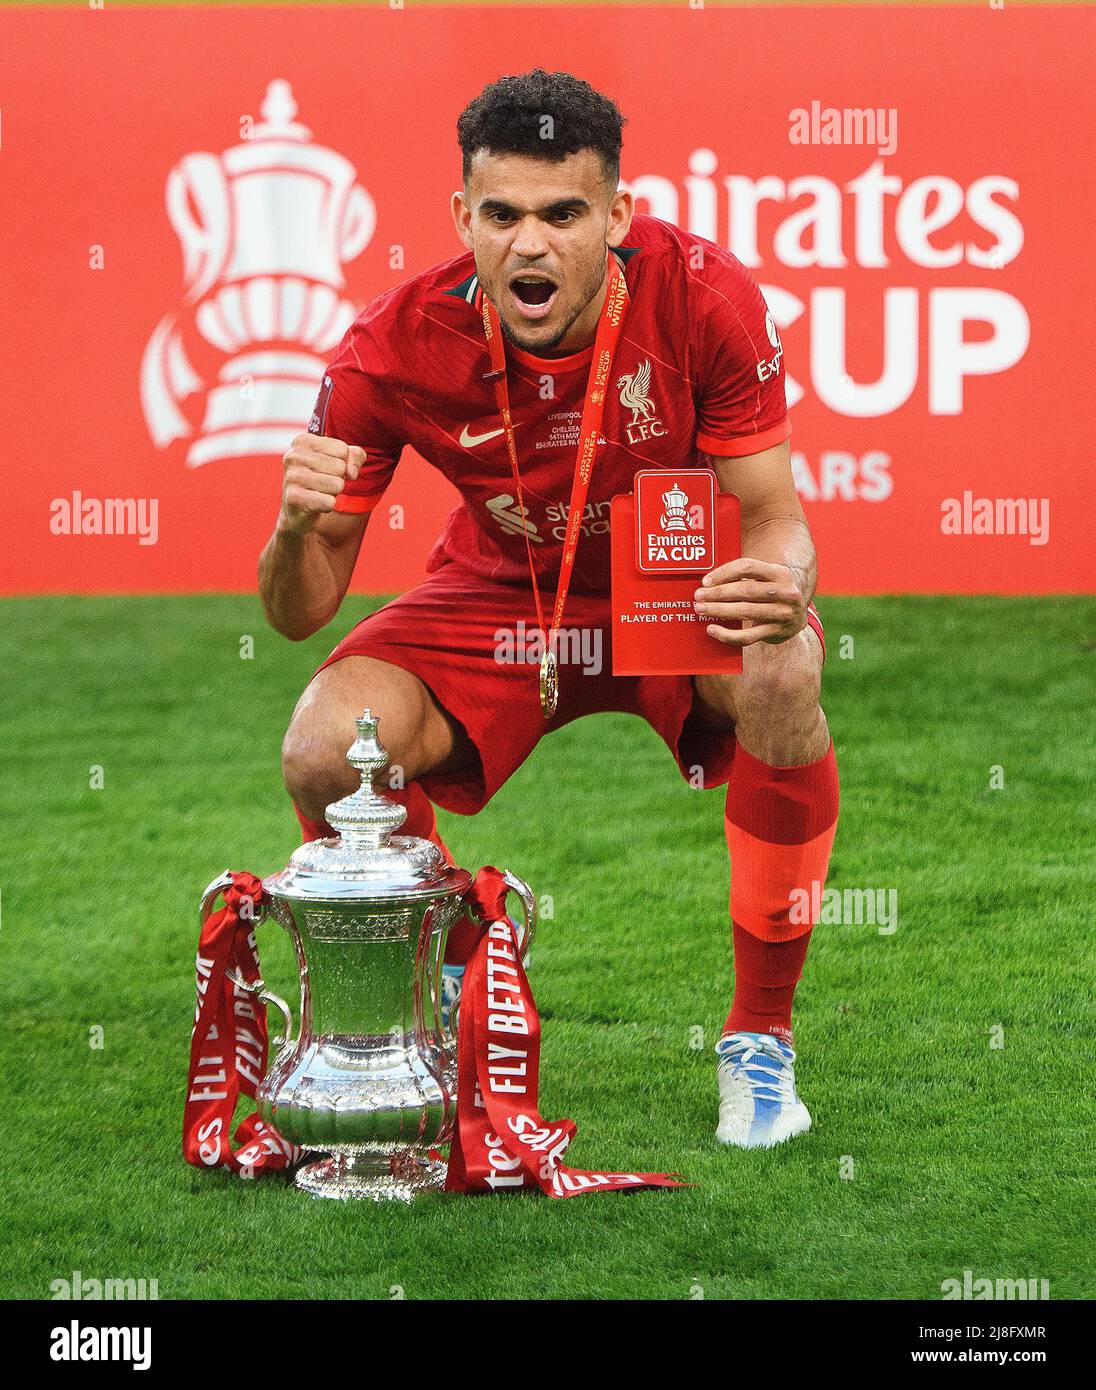 14 May 2022 - Chelsea v Liverpool - Emirates FA Cup Final - Wembley Stadium  Luis Diaz celebrates winning the FA Cup  Picture Credit : © Mark Pain / Alamy Live News Stock Photo